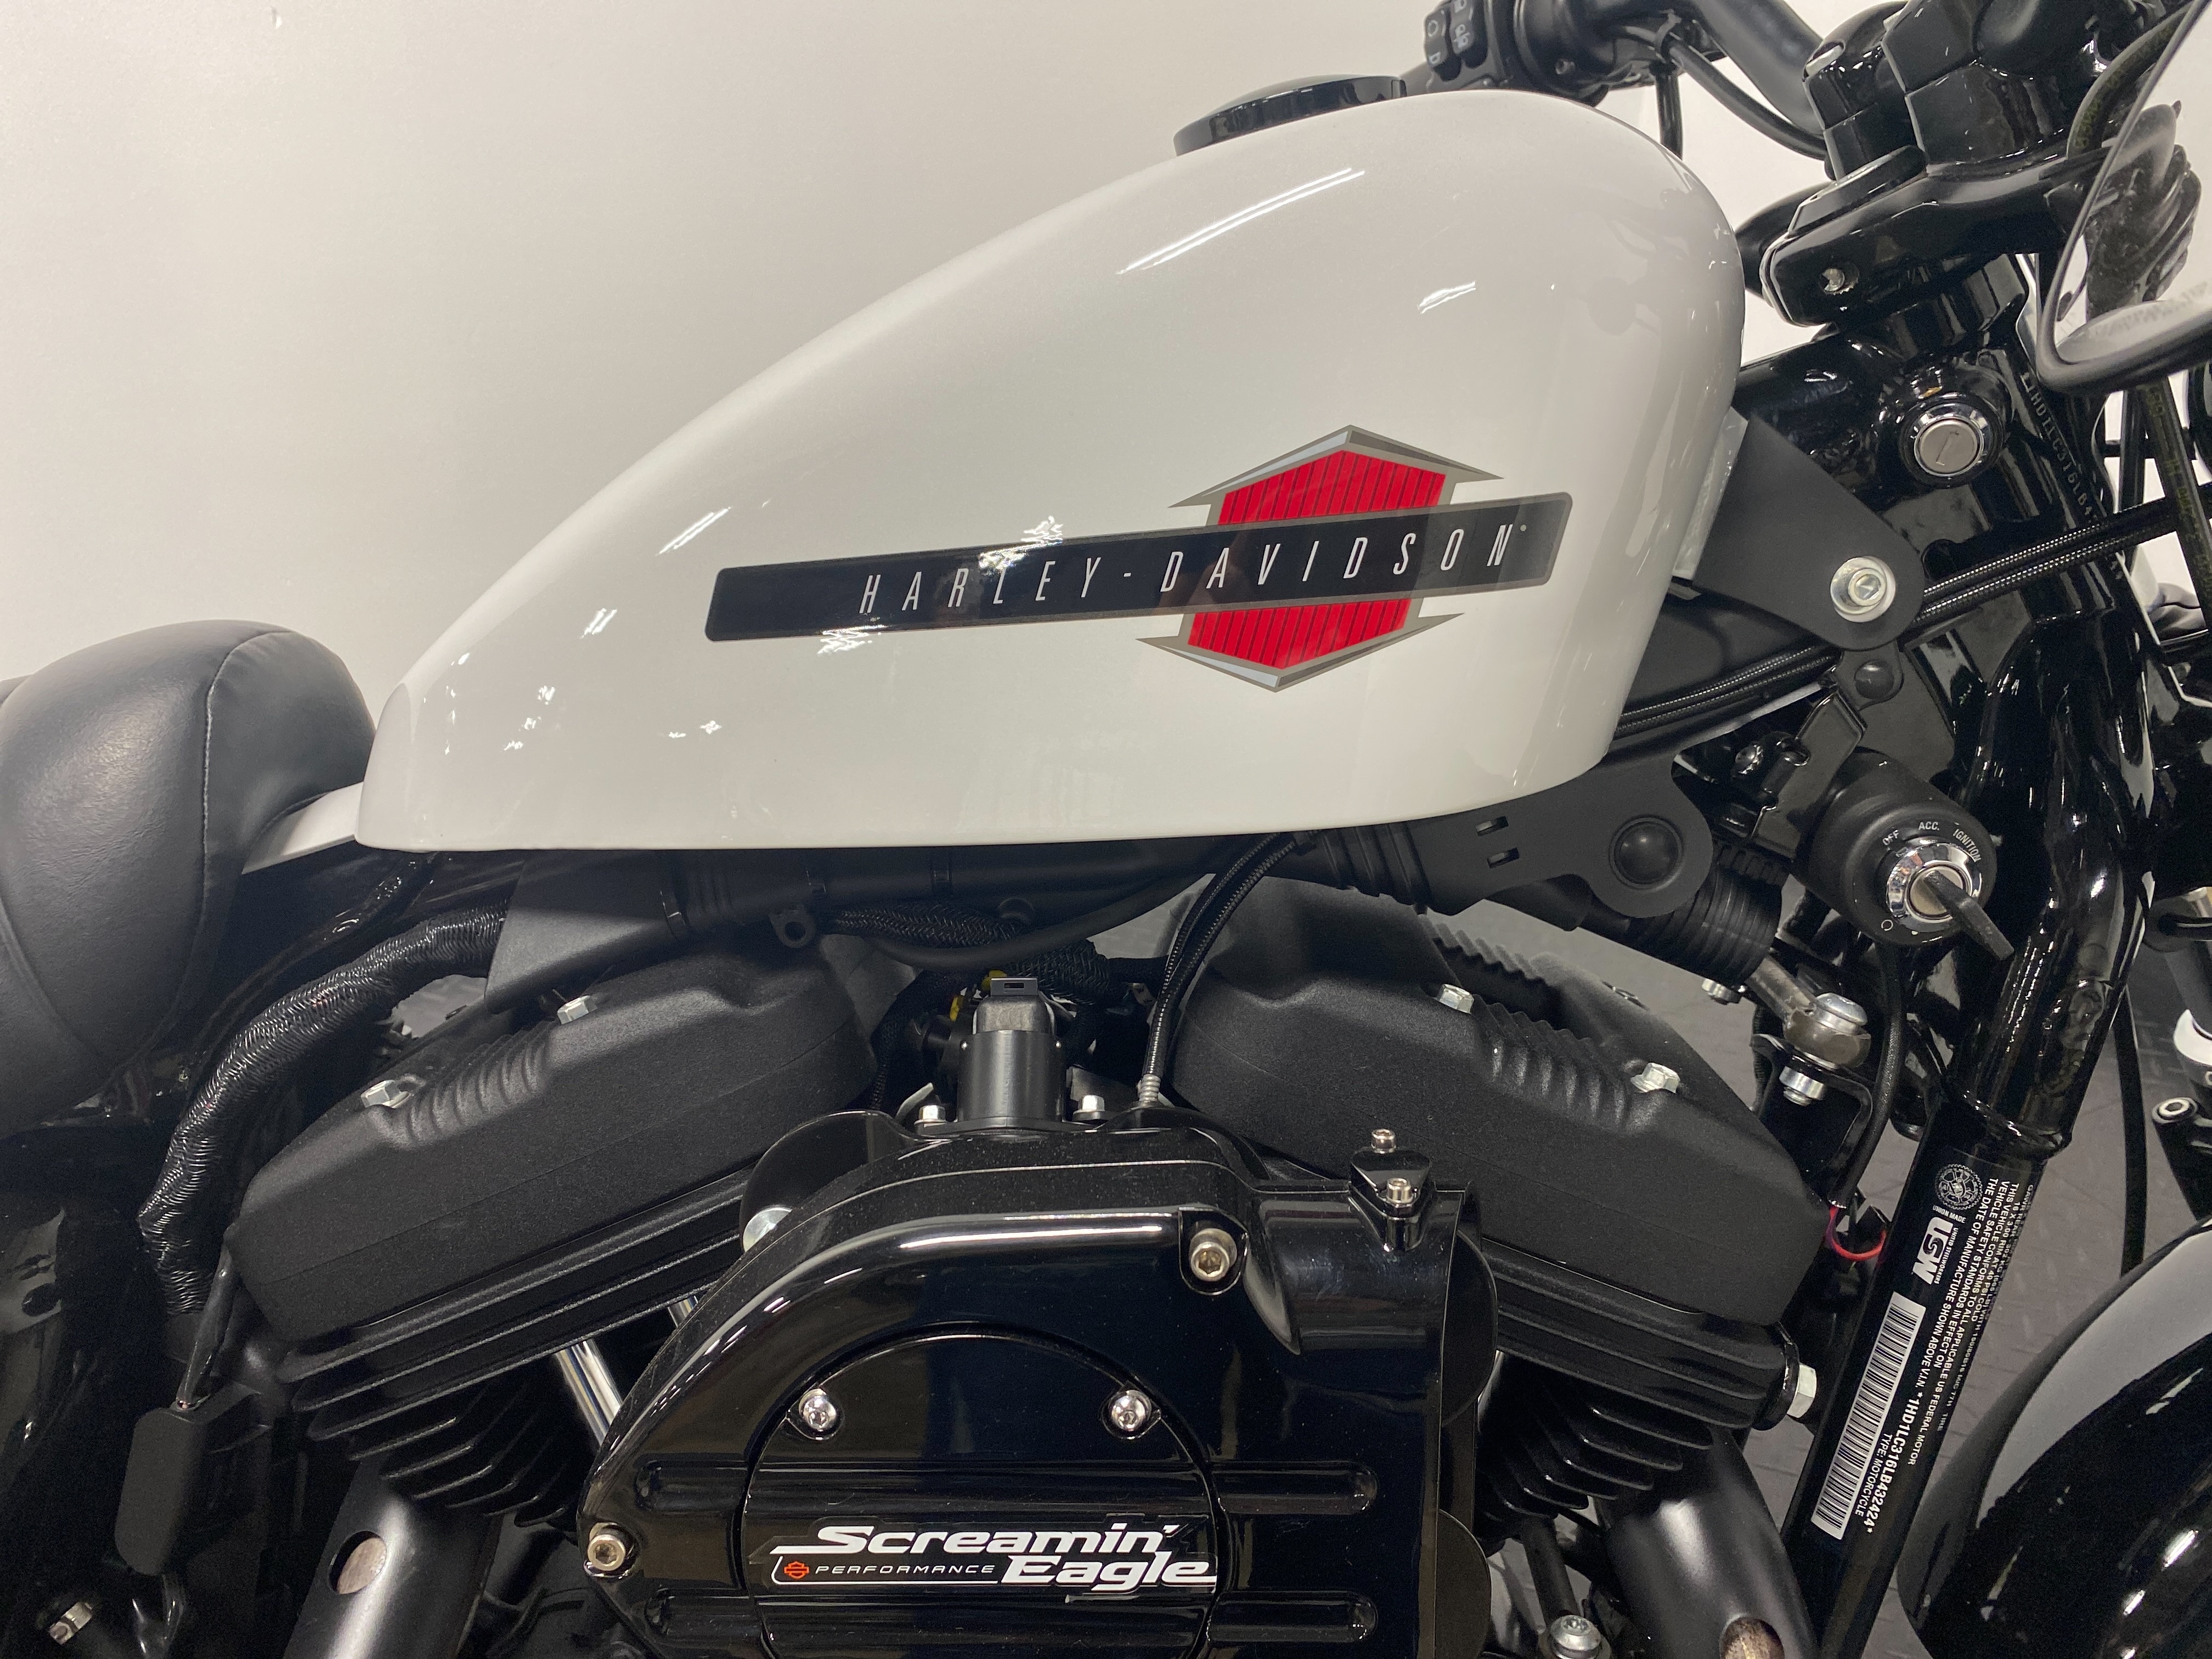 2020 Harley-Davidson Sportster Forty-Eight at Cannonball Harley-Davidson